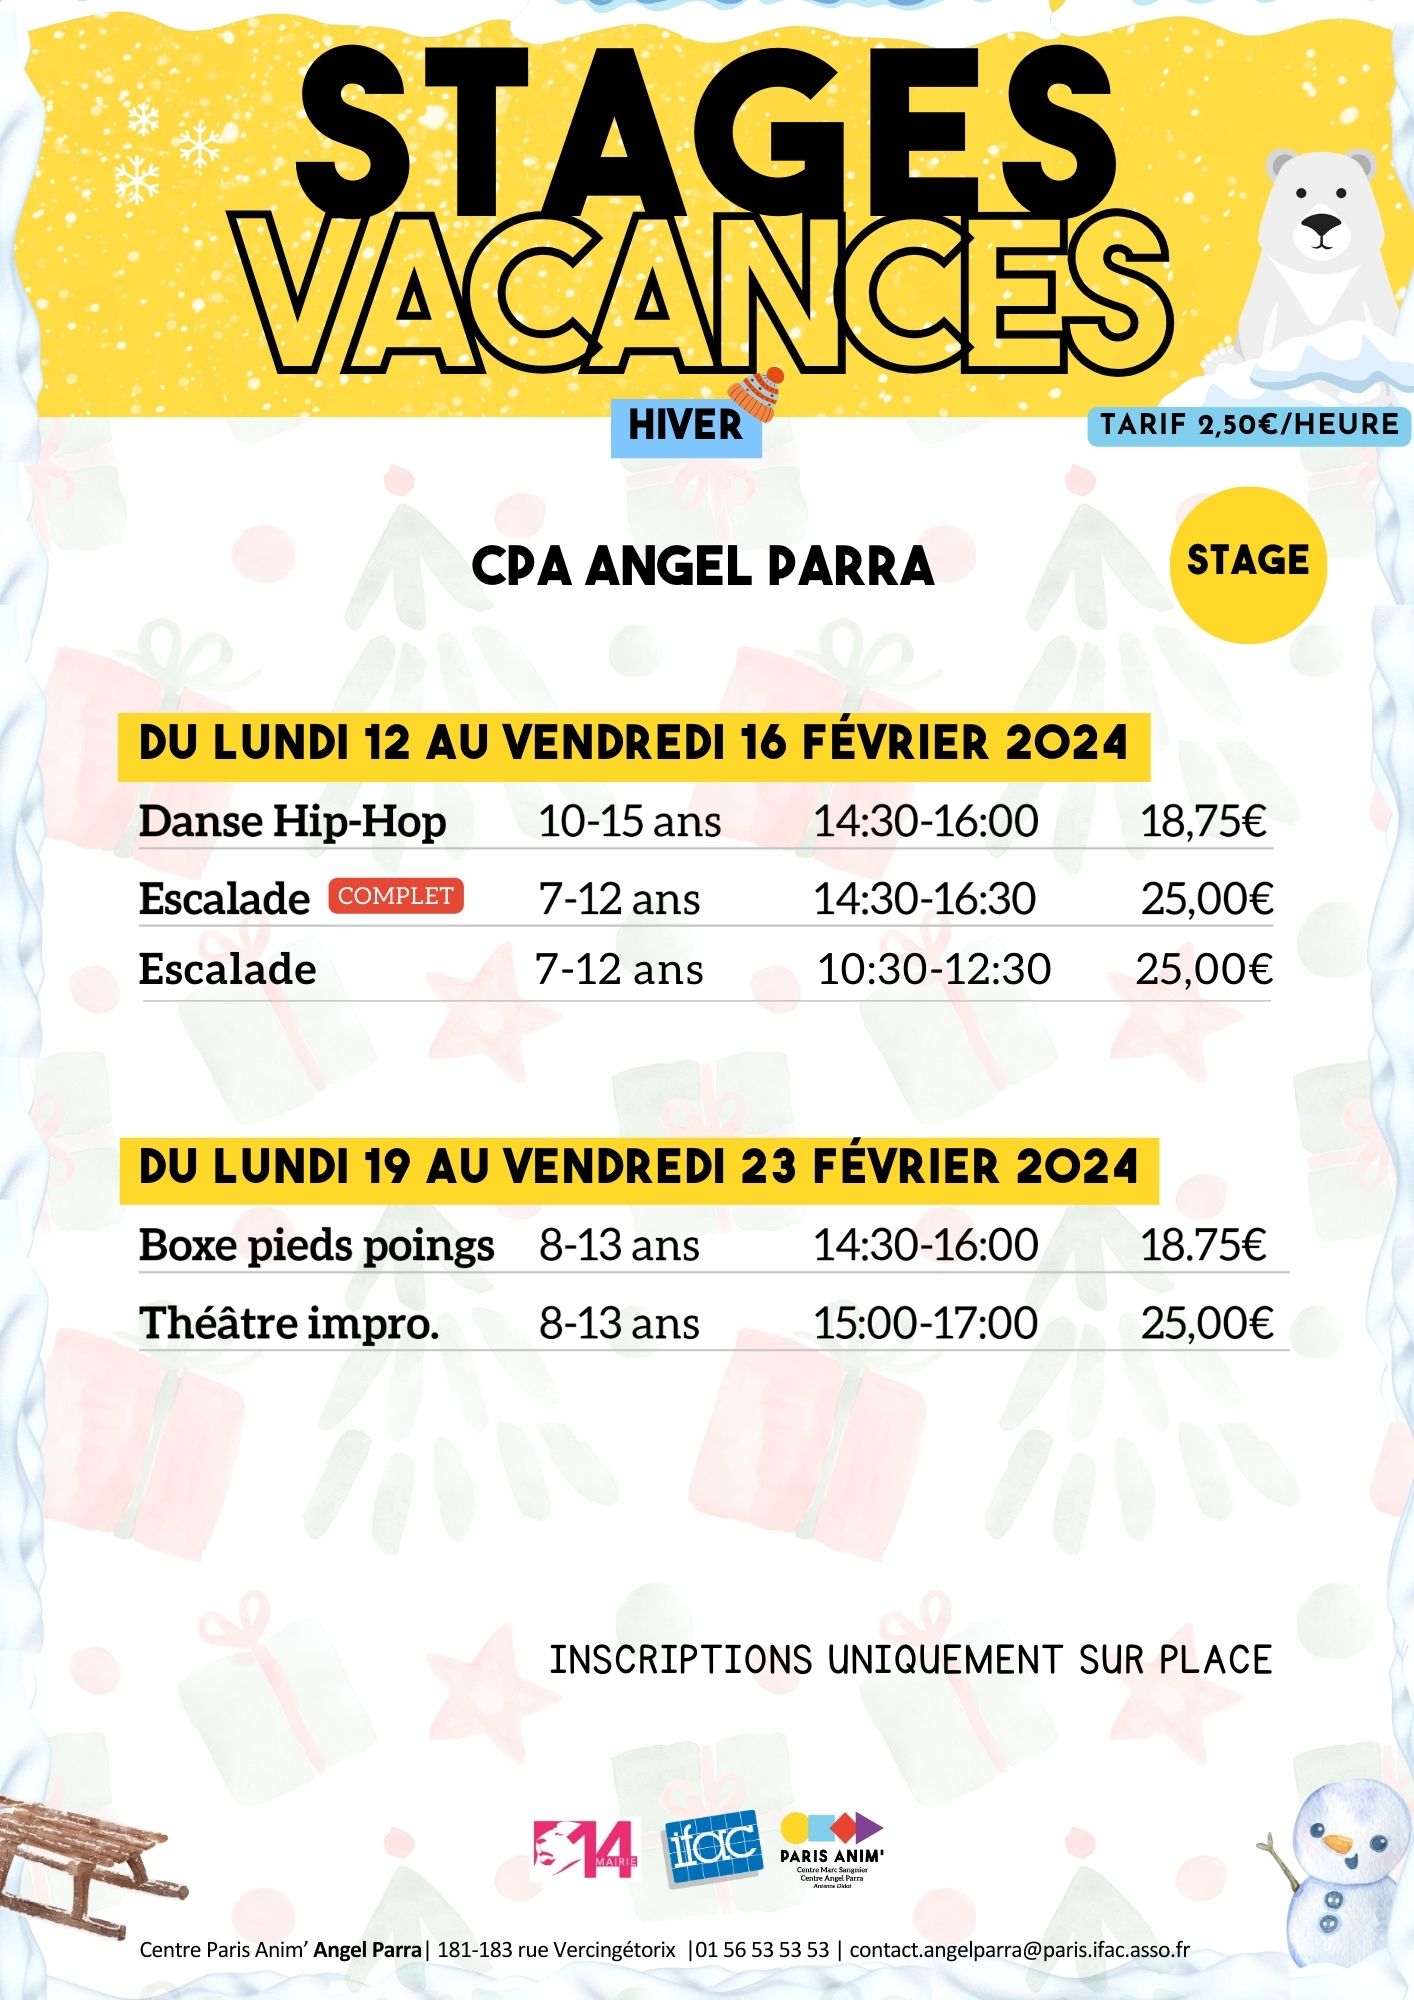 Stages vacances-hiver